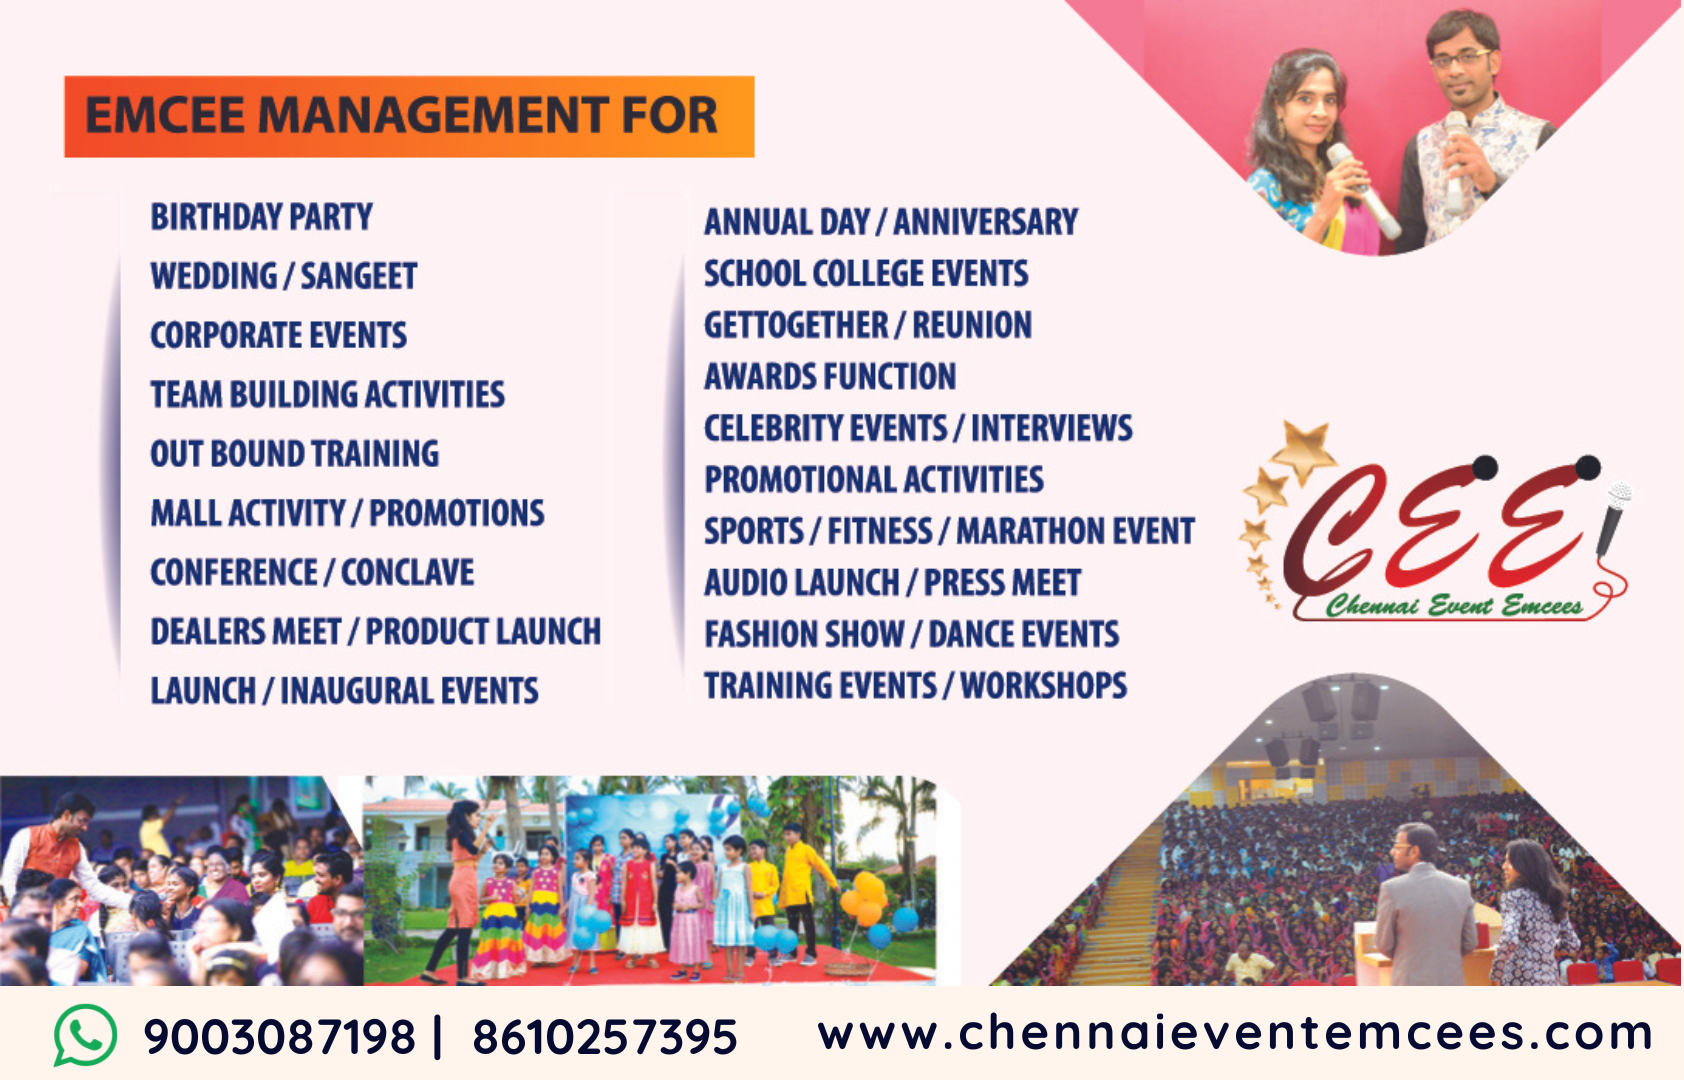 Emcee Management by Chennai Event Emcees